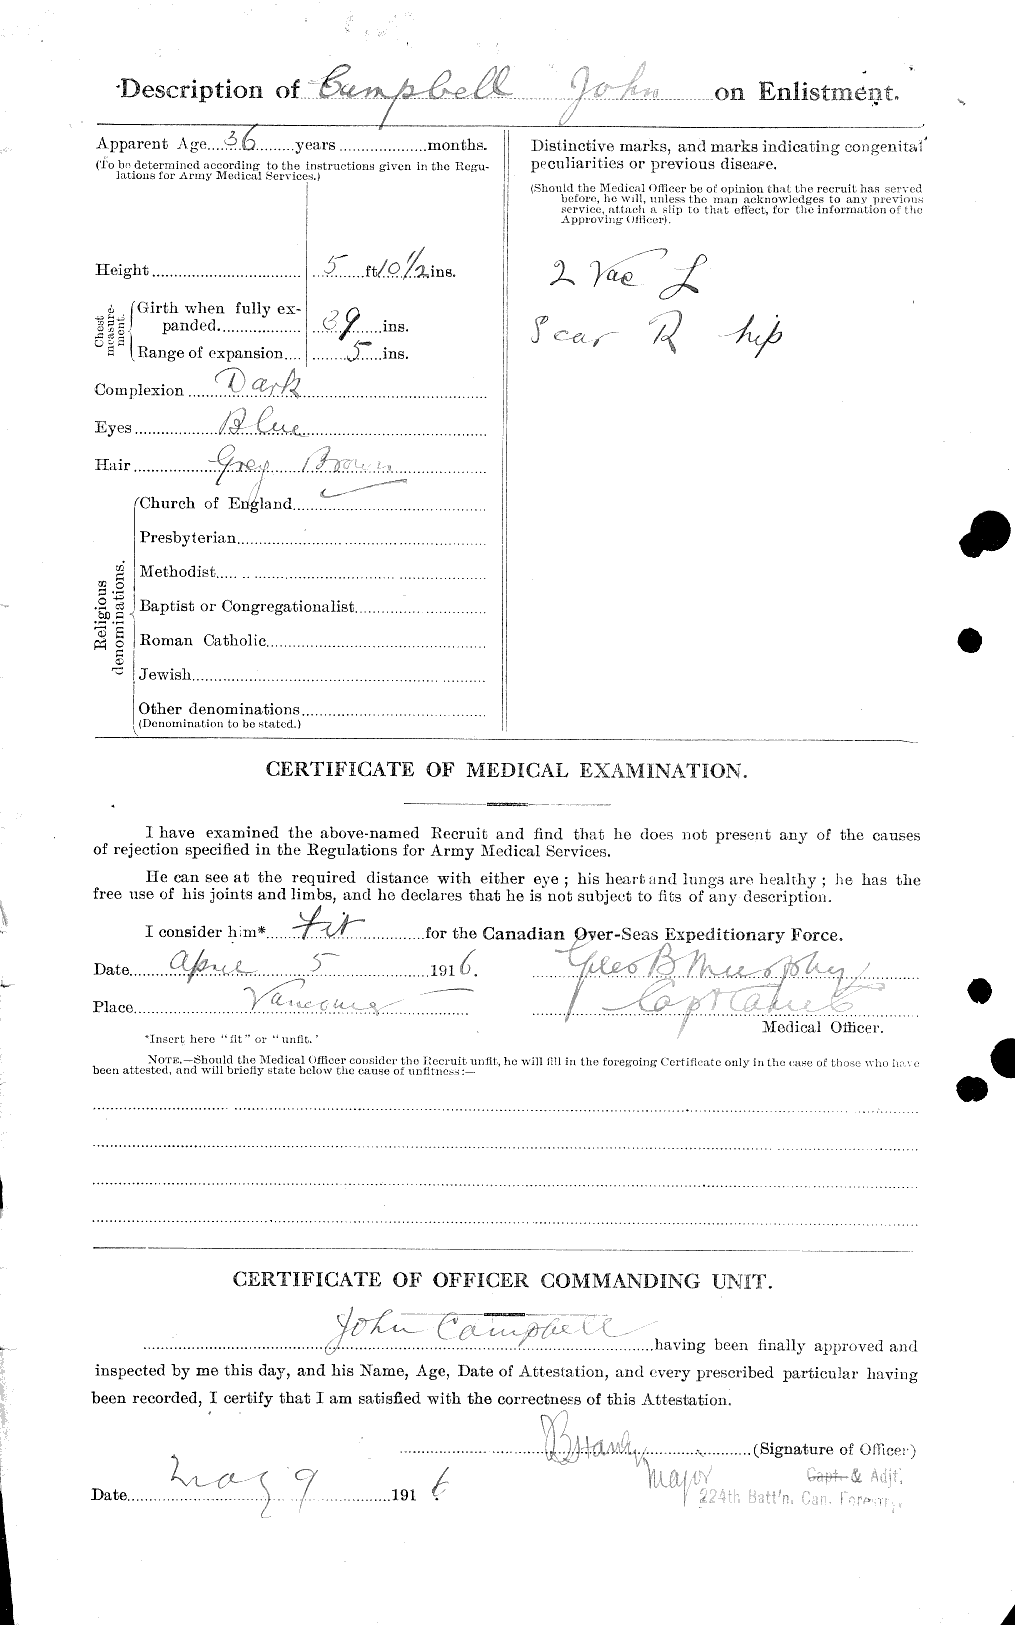 Personnel Records of the First World War - CEF 006824b